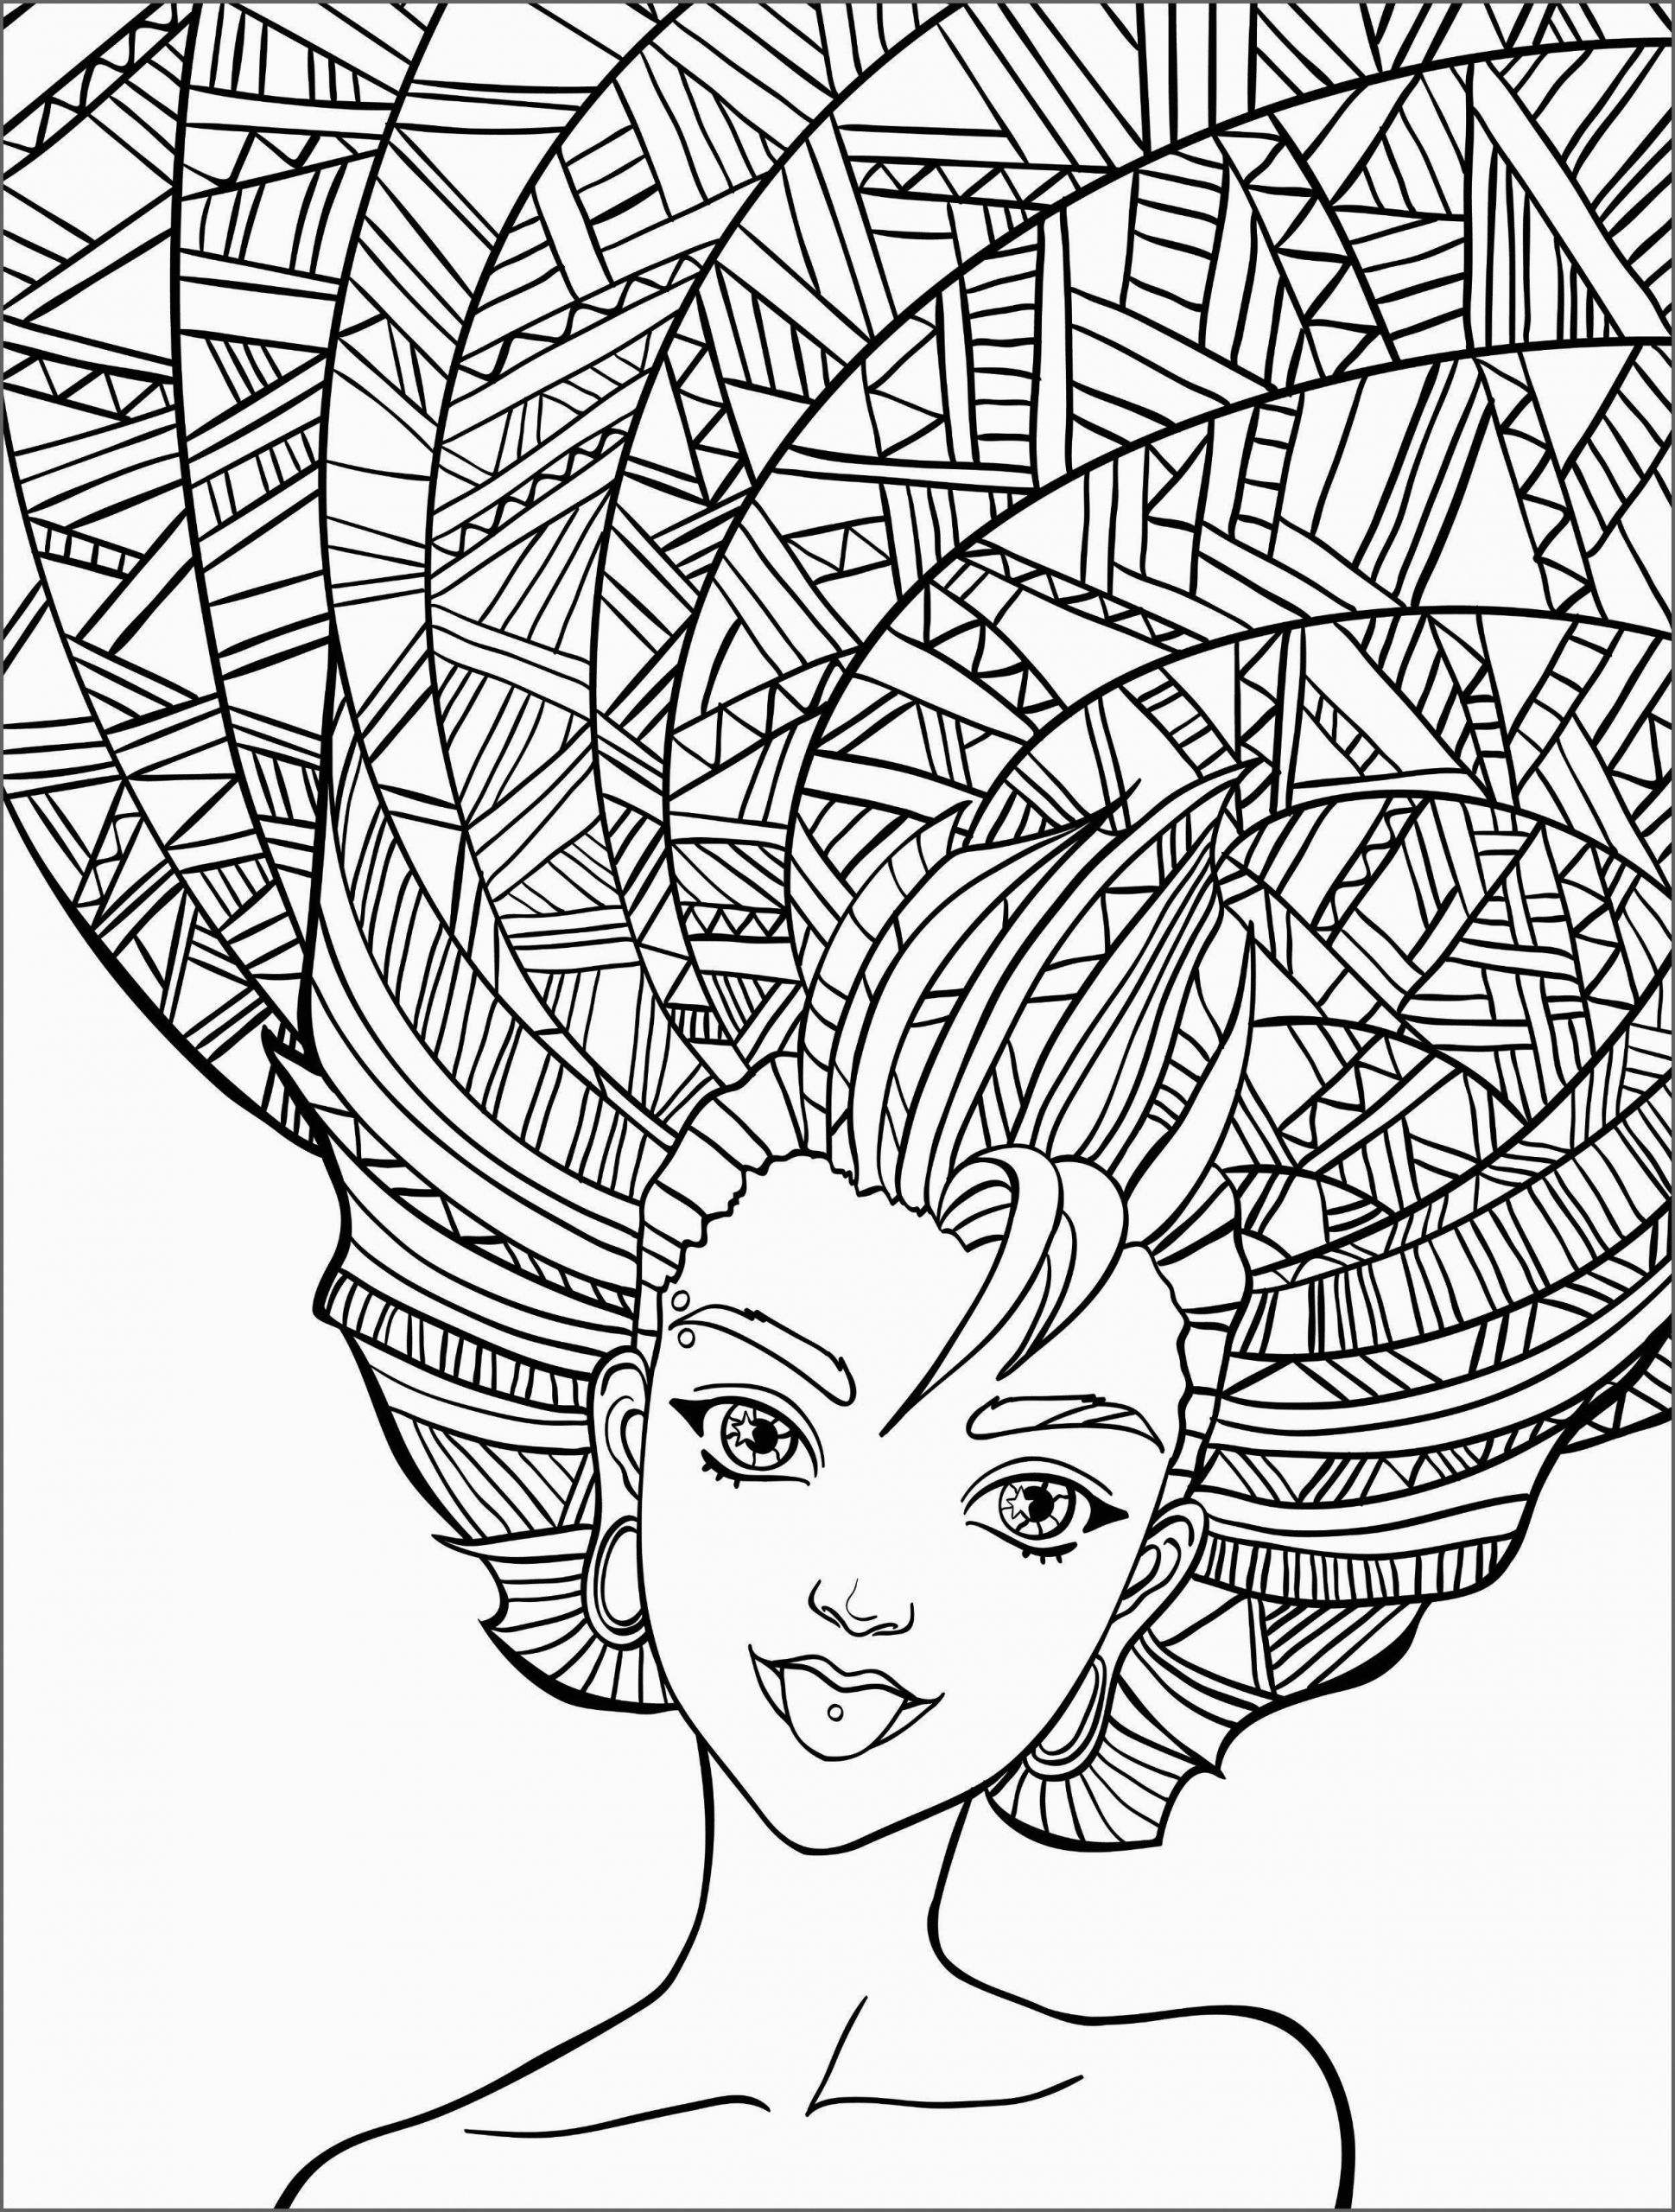 Free Printable Coloring Pages Adult
 Coloring Pages for Adults Best Coloring Pages For Kids